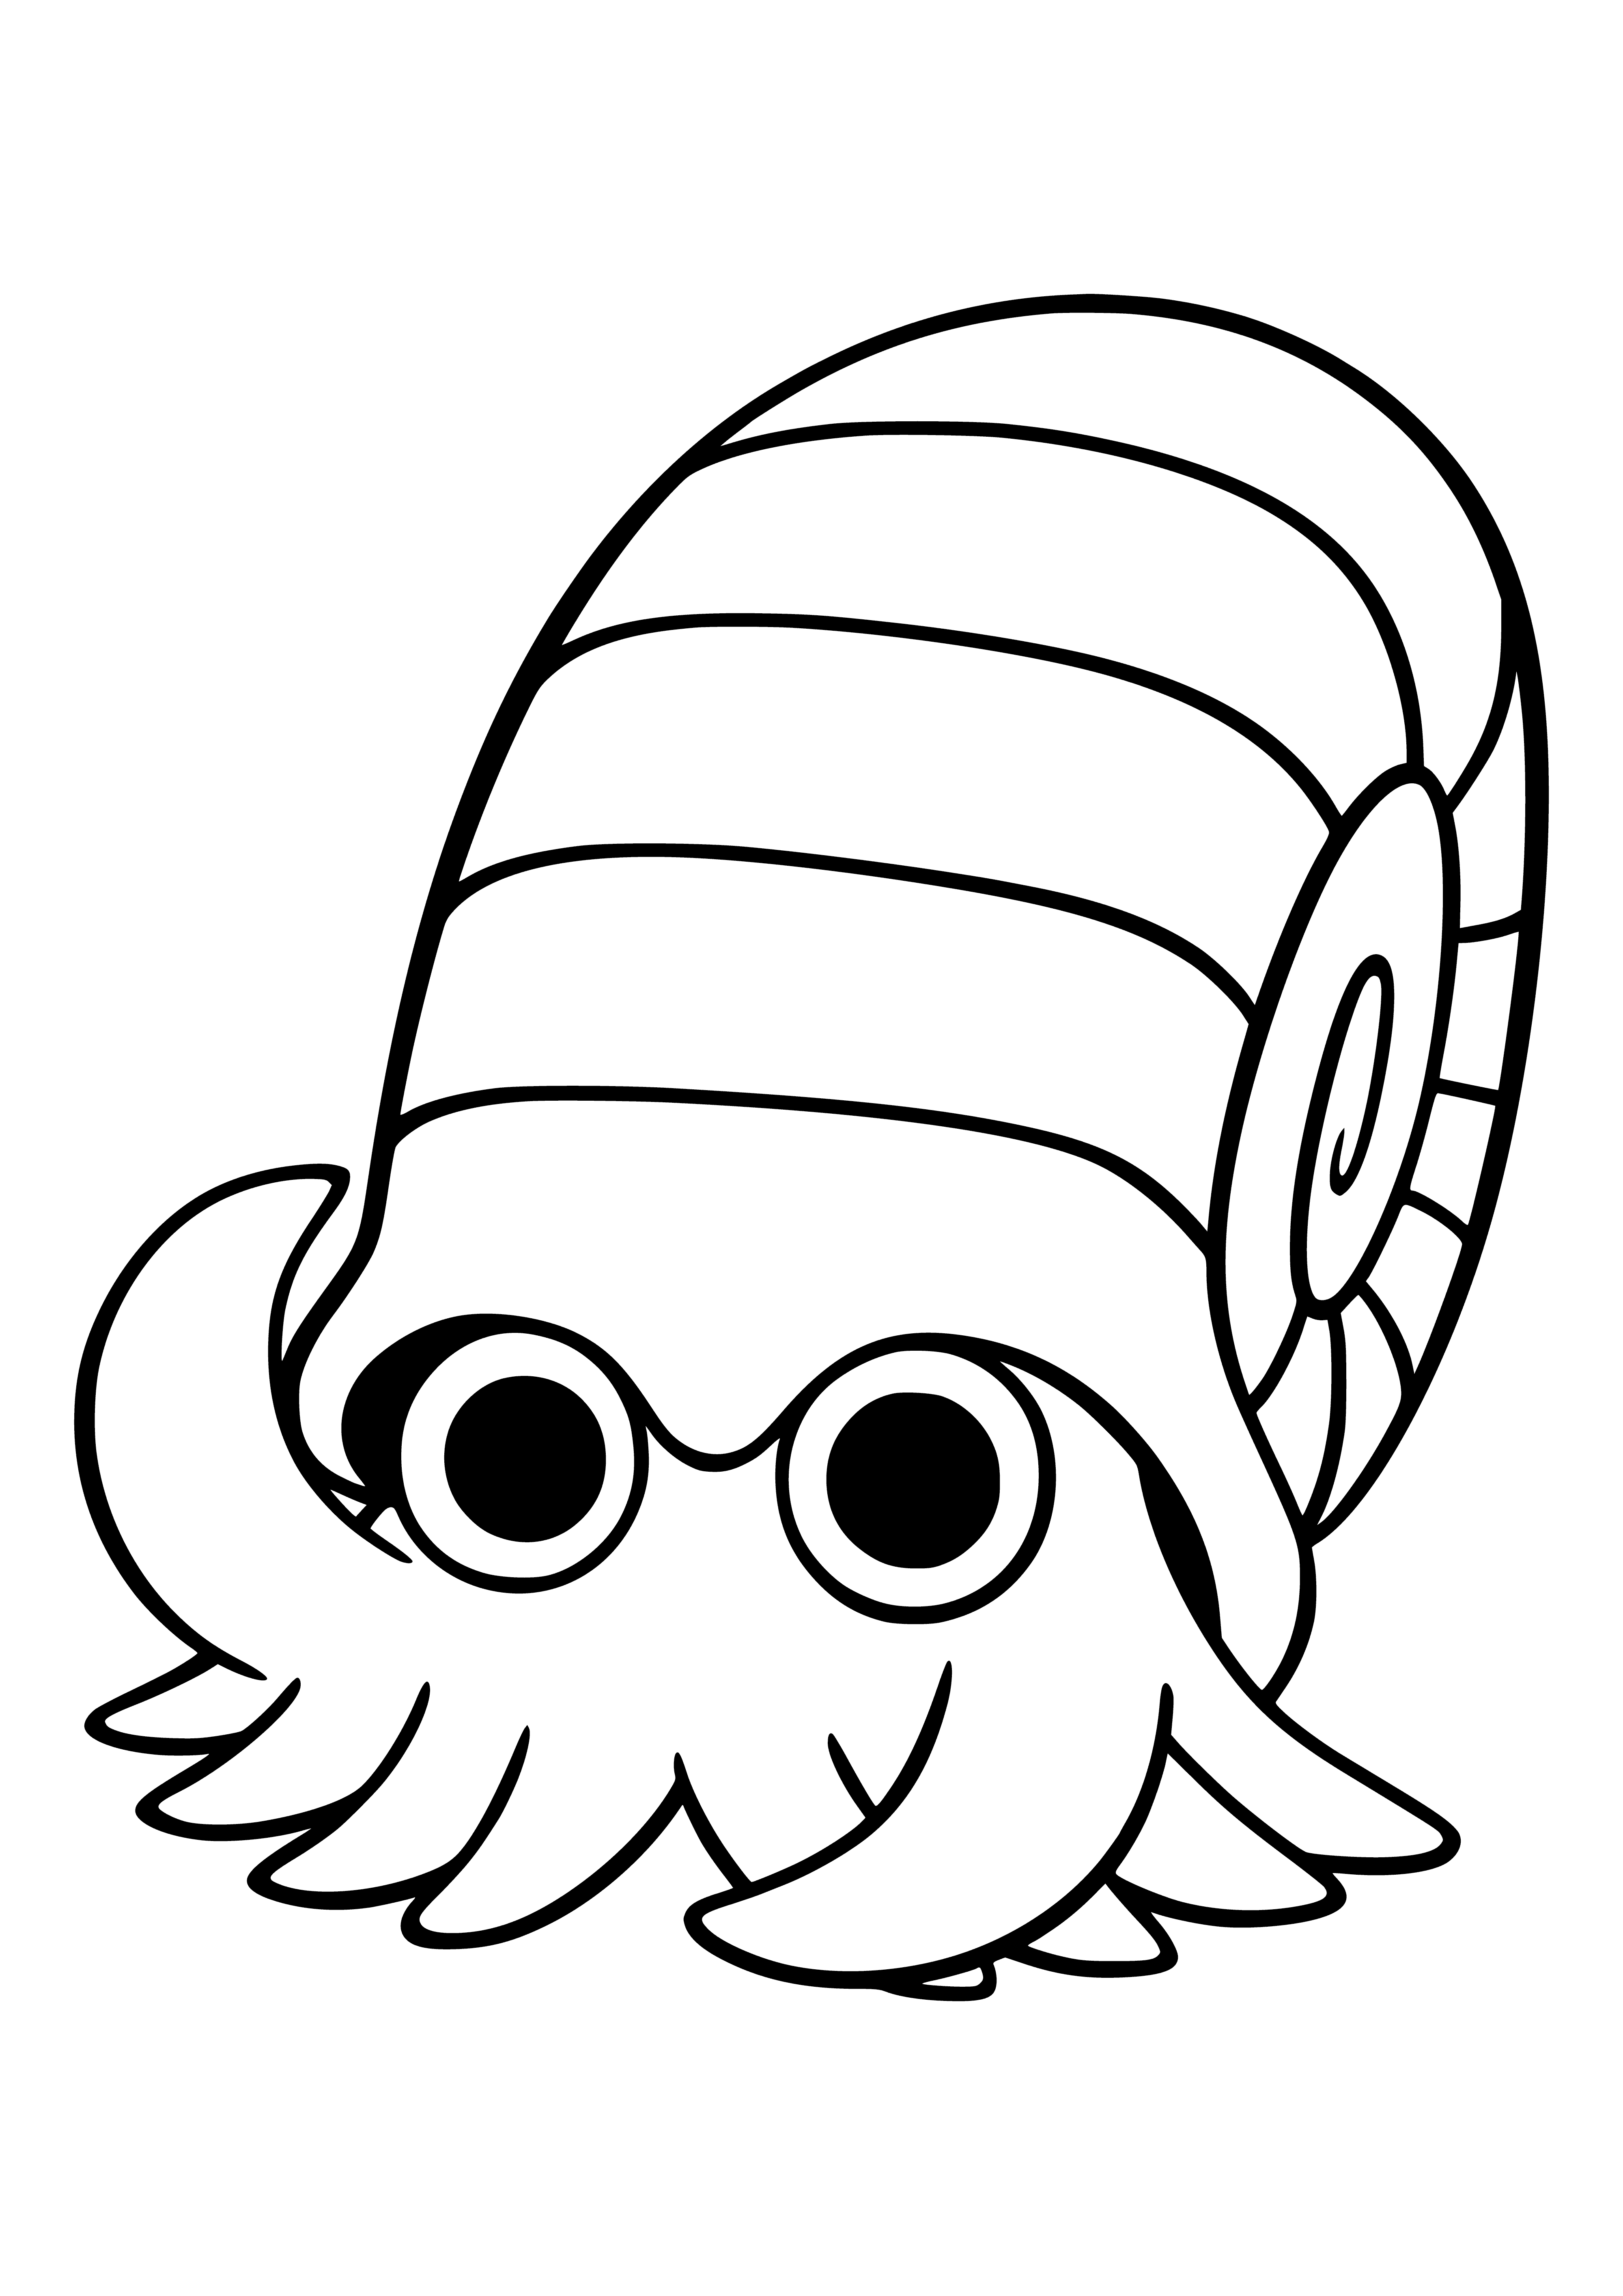 coloring page: Omanyte is small, blue, & fossil Pokémon with a hard shell & eyes with black circular pupils & red star on its back.